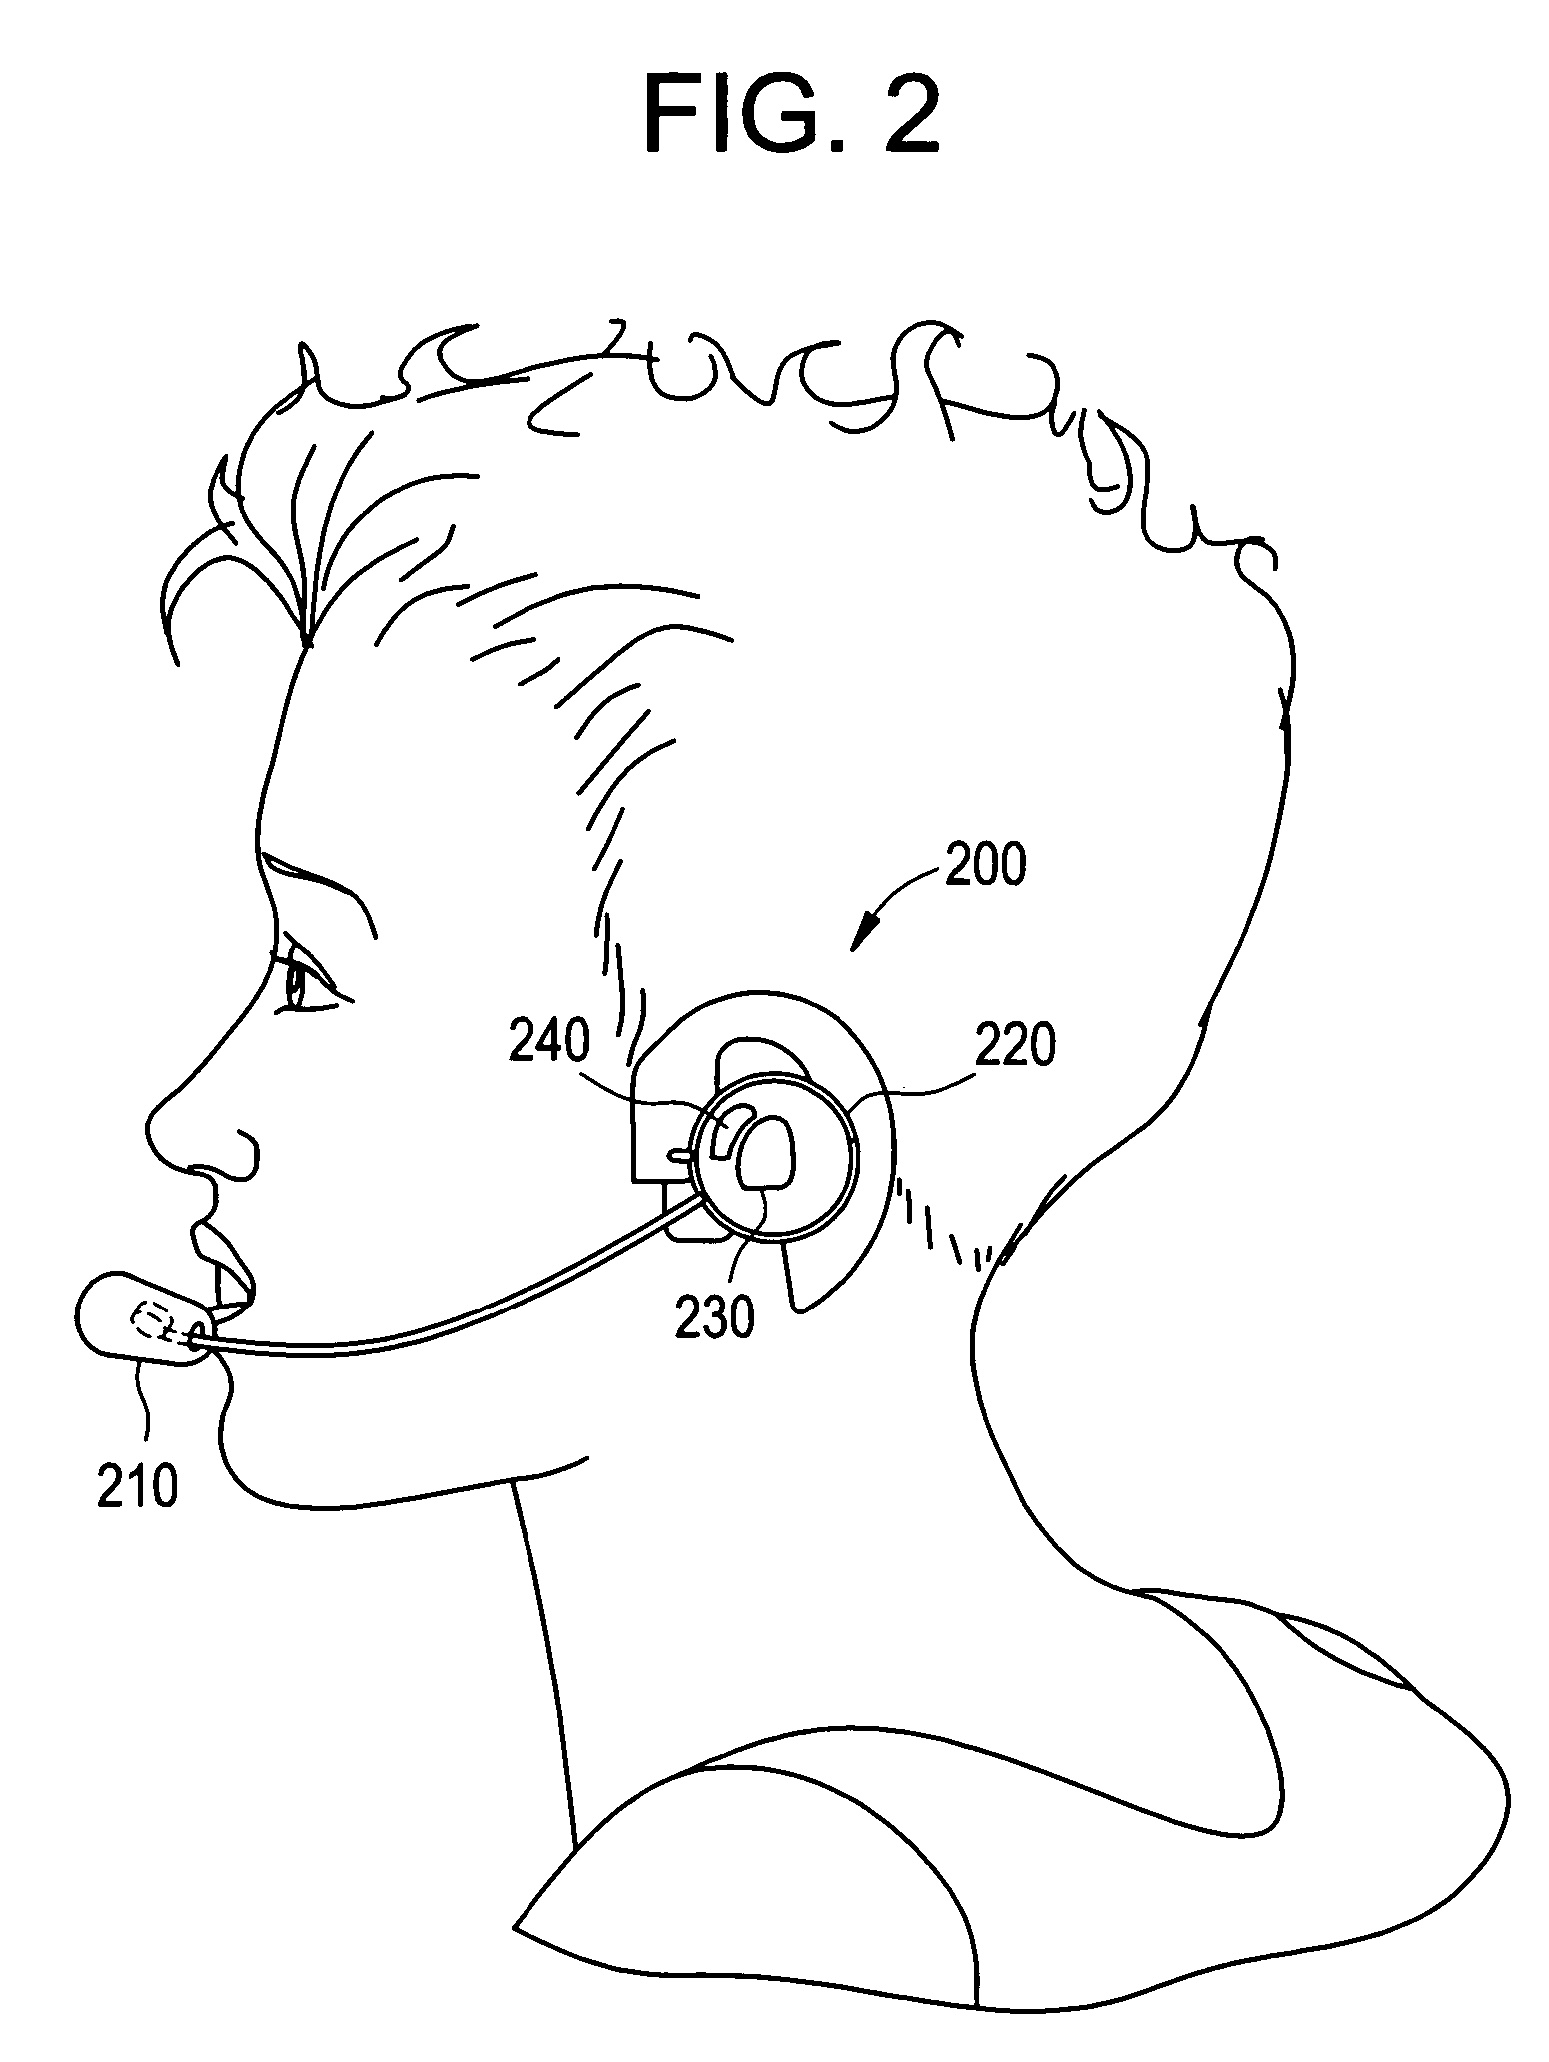 Method and system for utilizing wireless voice technology within a radiology workflow